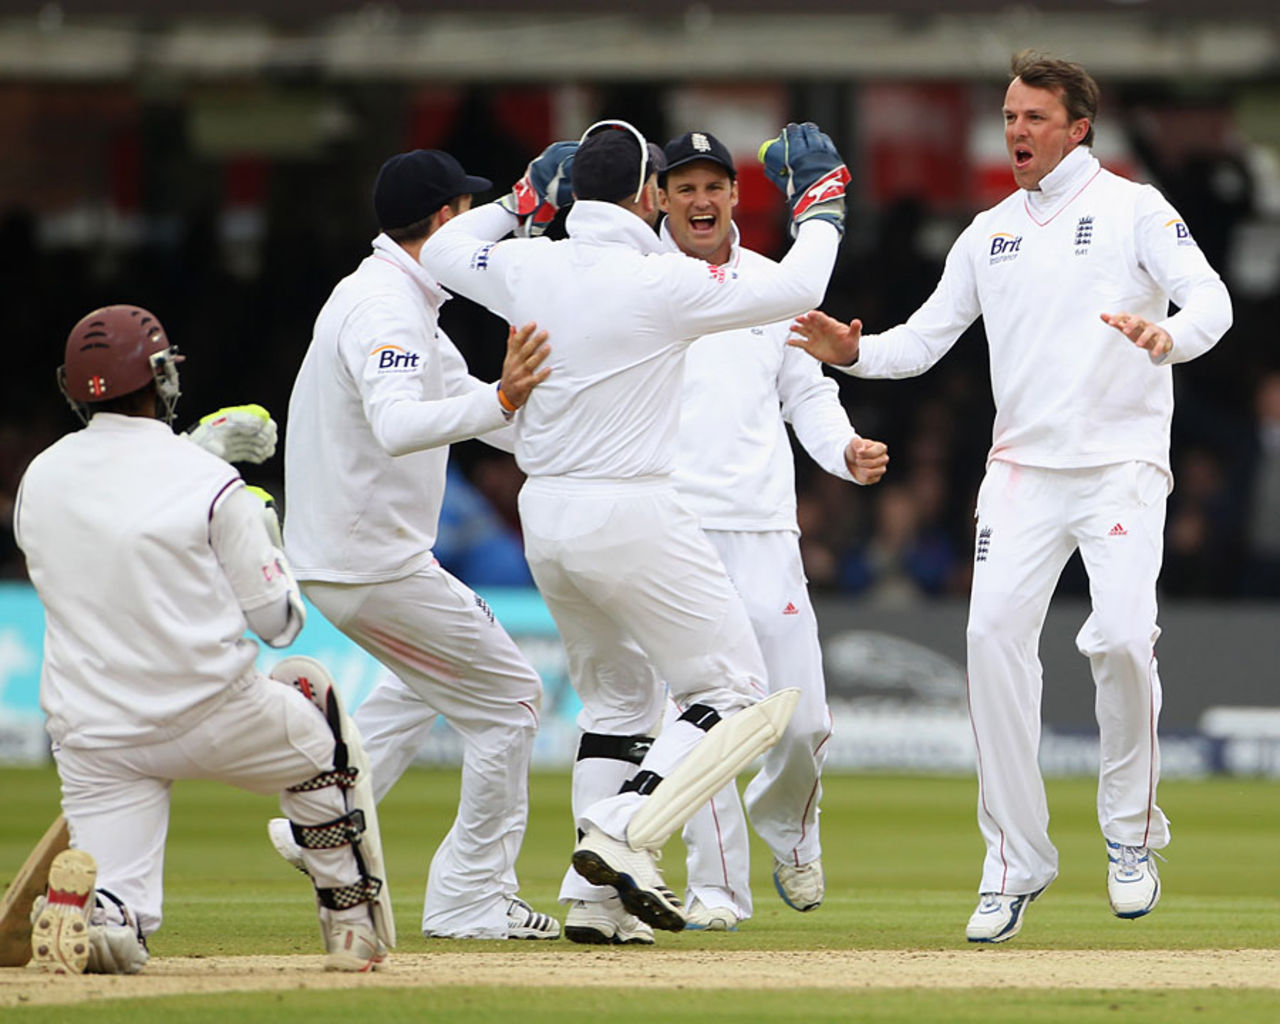 Graeme Swann had Shivnarine Chanderpaul lbw for 91, England v West Indies, 1st Test, Lord's, 4th day, May 20, 2012